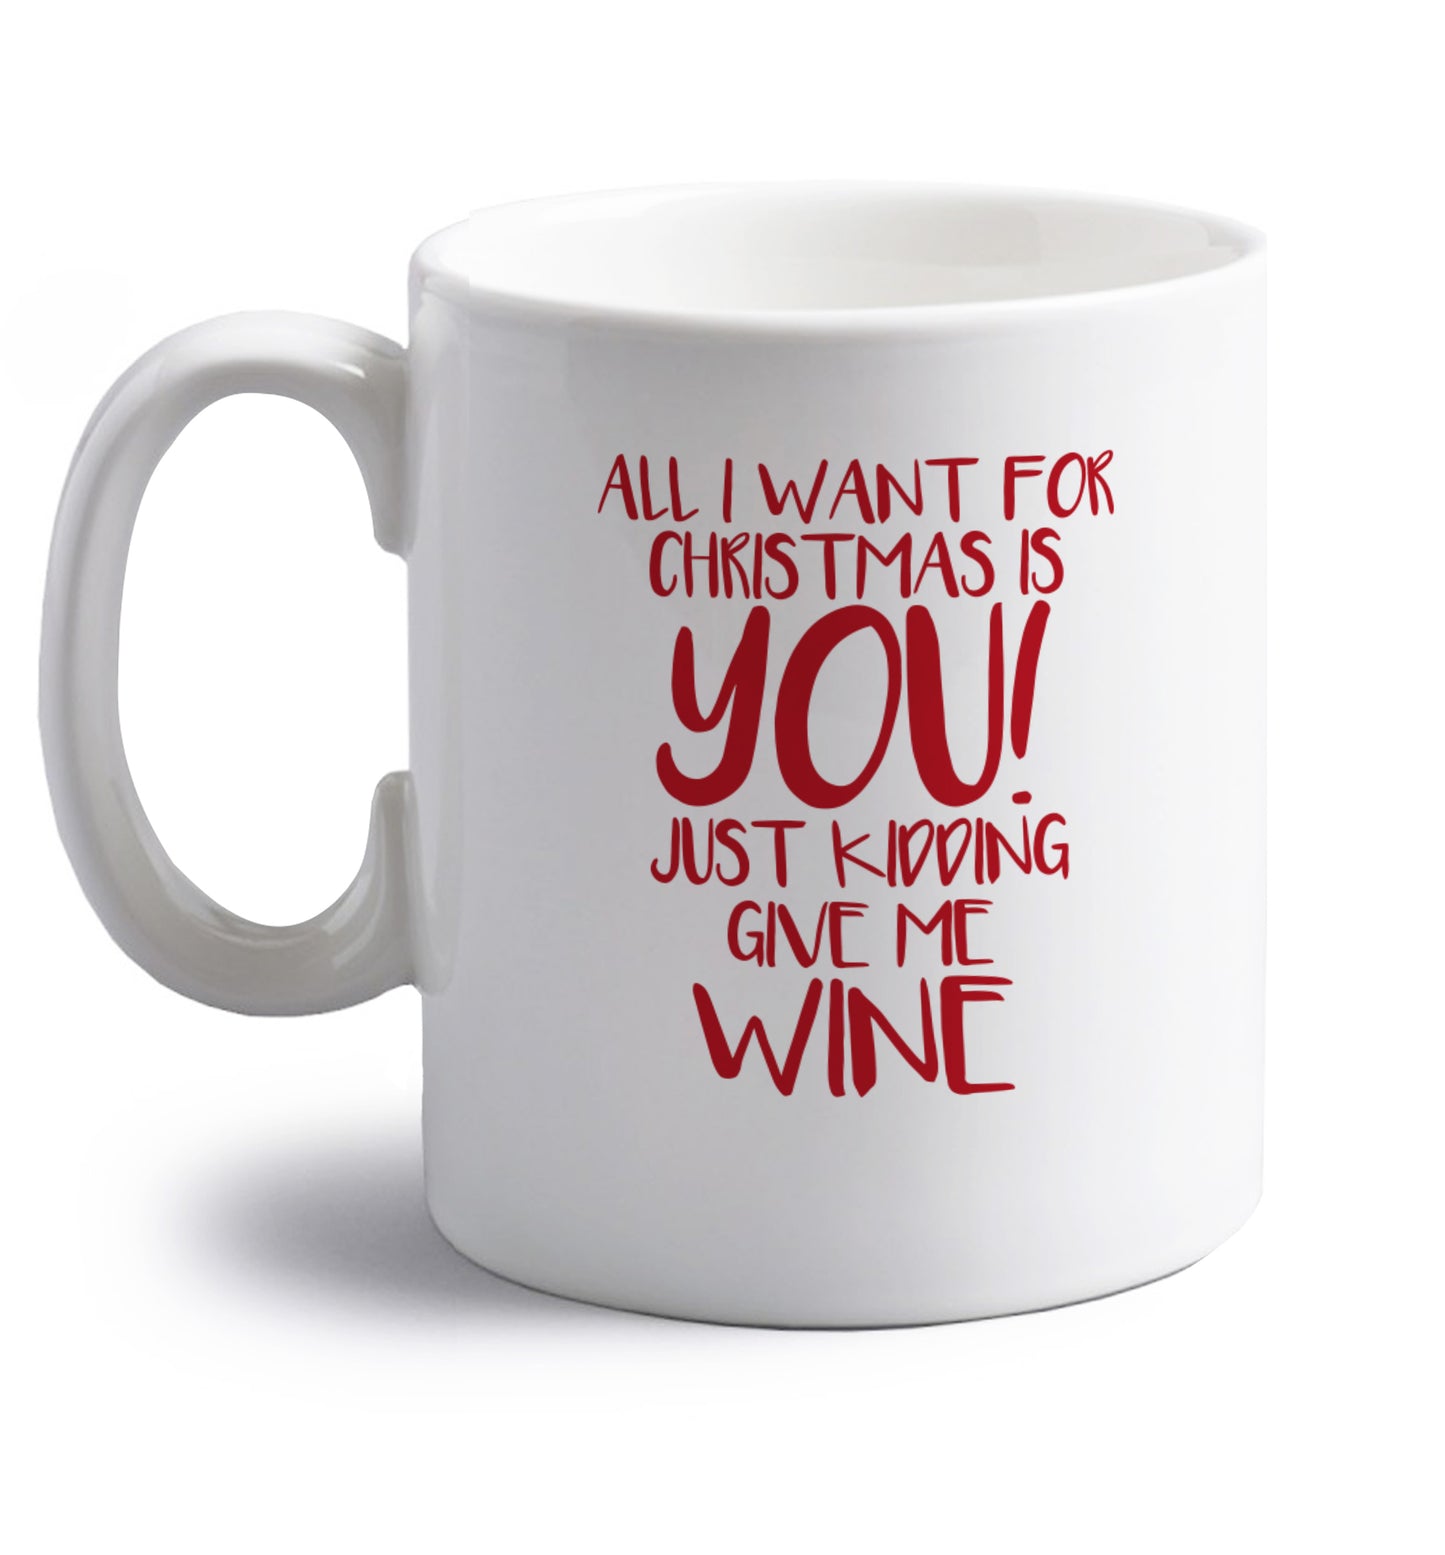 All I want for christmas is you just kidding give me the wine right handed white ceramic mug 